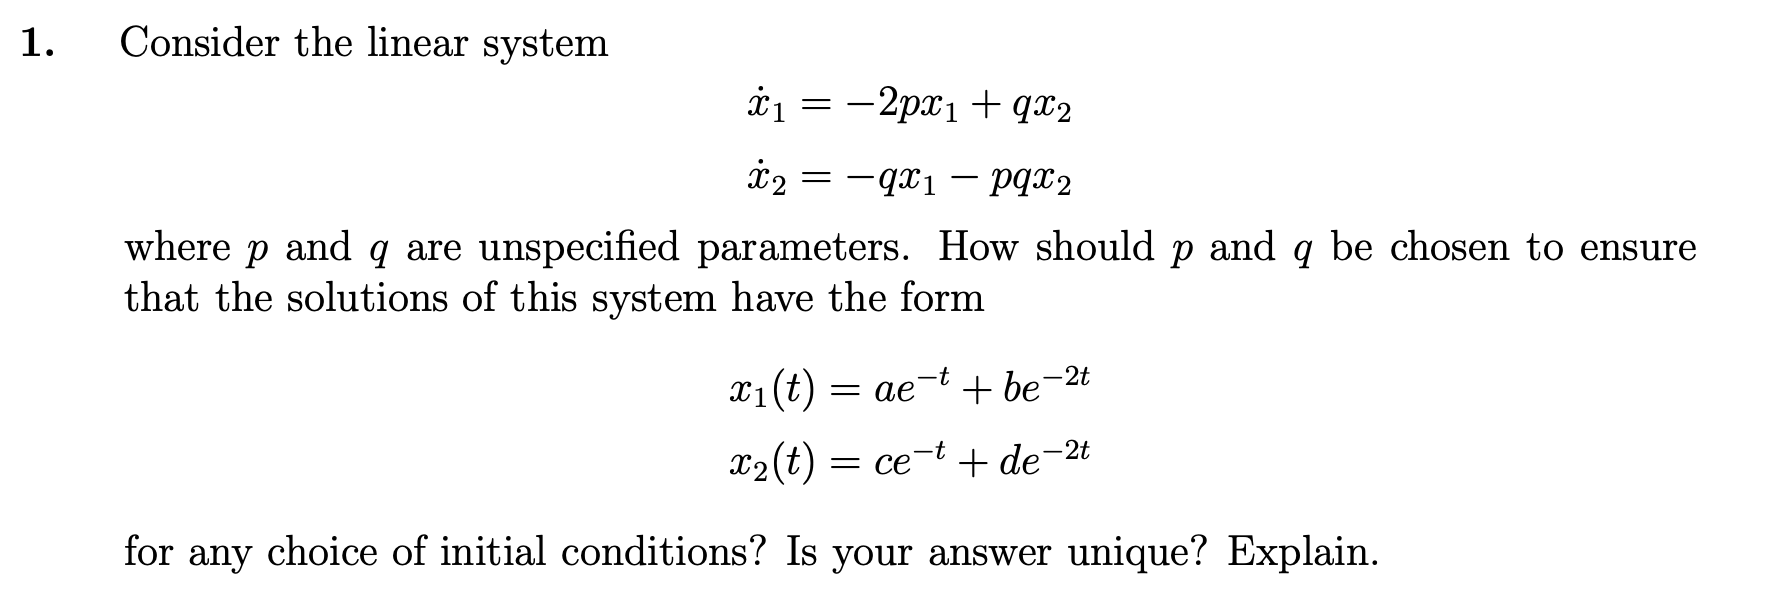 1.
Consider the linear system
i1 = -2px1 + qx2
i2
-qx1 – pgx2
where p and q are unspecified parameters. How should p and q be chosen to ensure
that the solutions of this system have the form
X1(t)
+ be-2t
= ae
X2(t) = ce-t + de-2t
for any choice of initial conditions? Is your answer unique? Explain.
